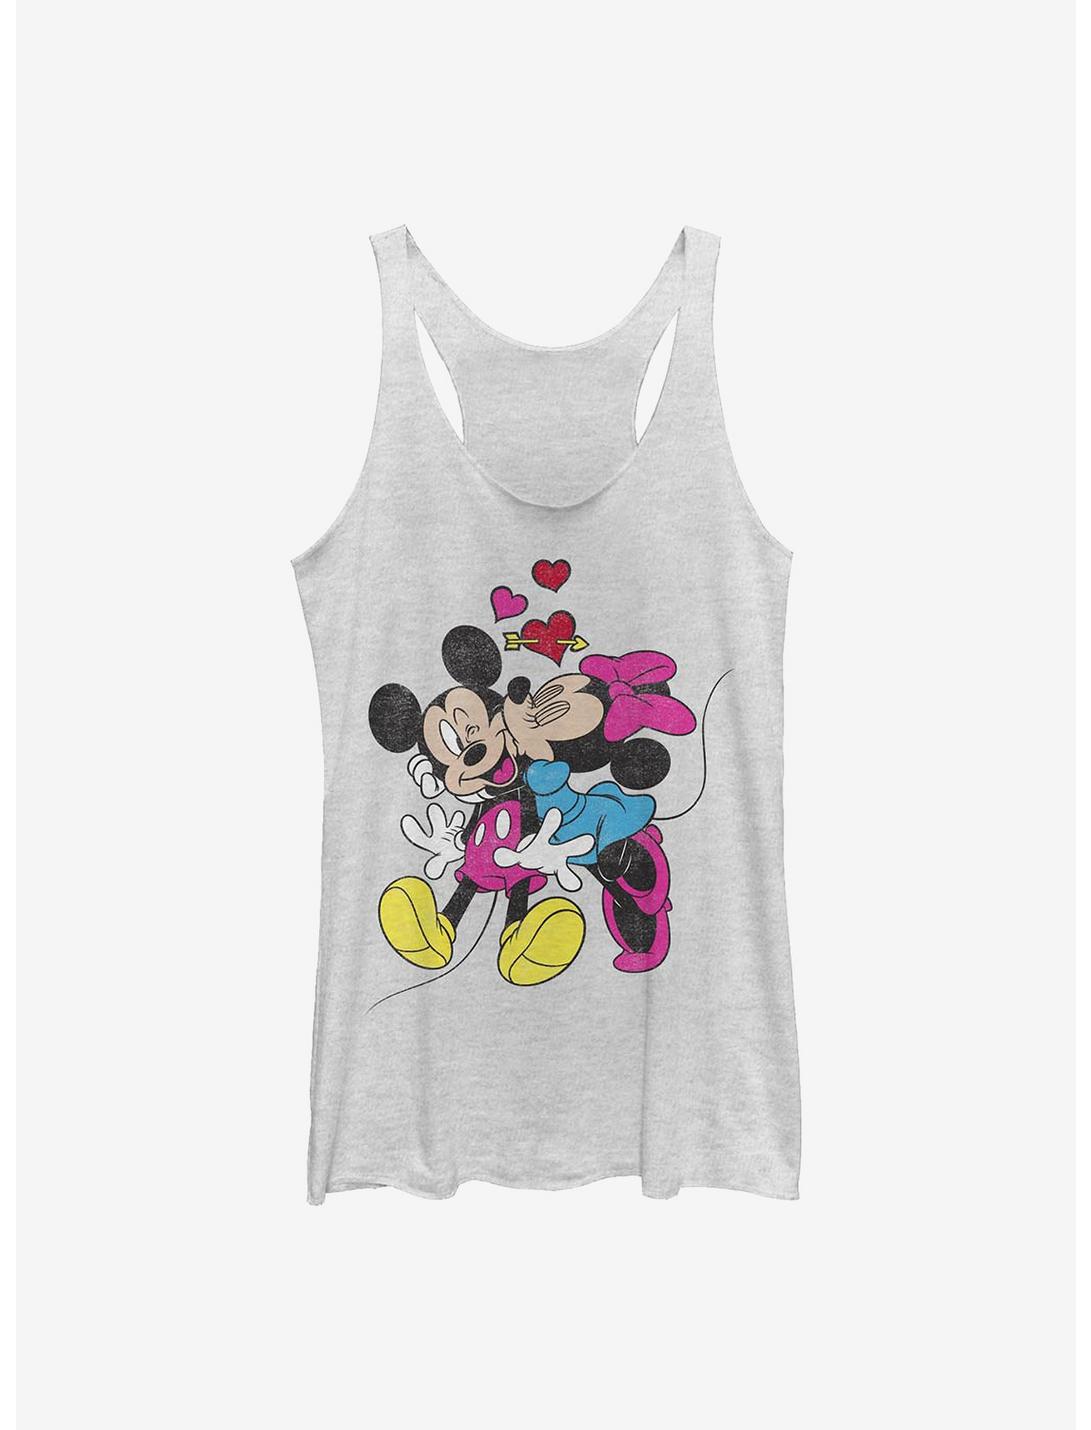 Disney Mickey Mouse Minnie Love Womens Tank Top, WHITE HTR, hi-res